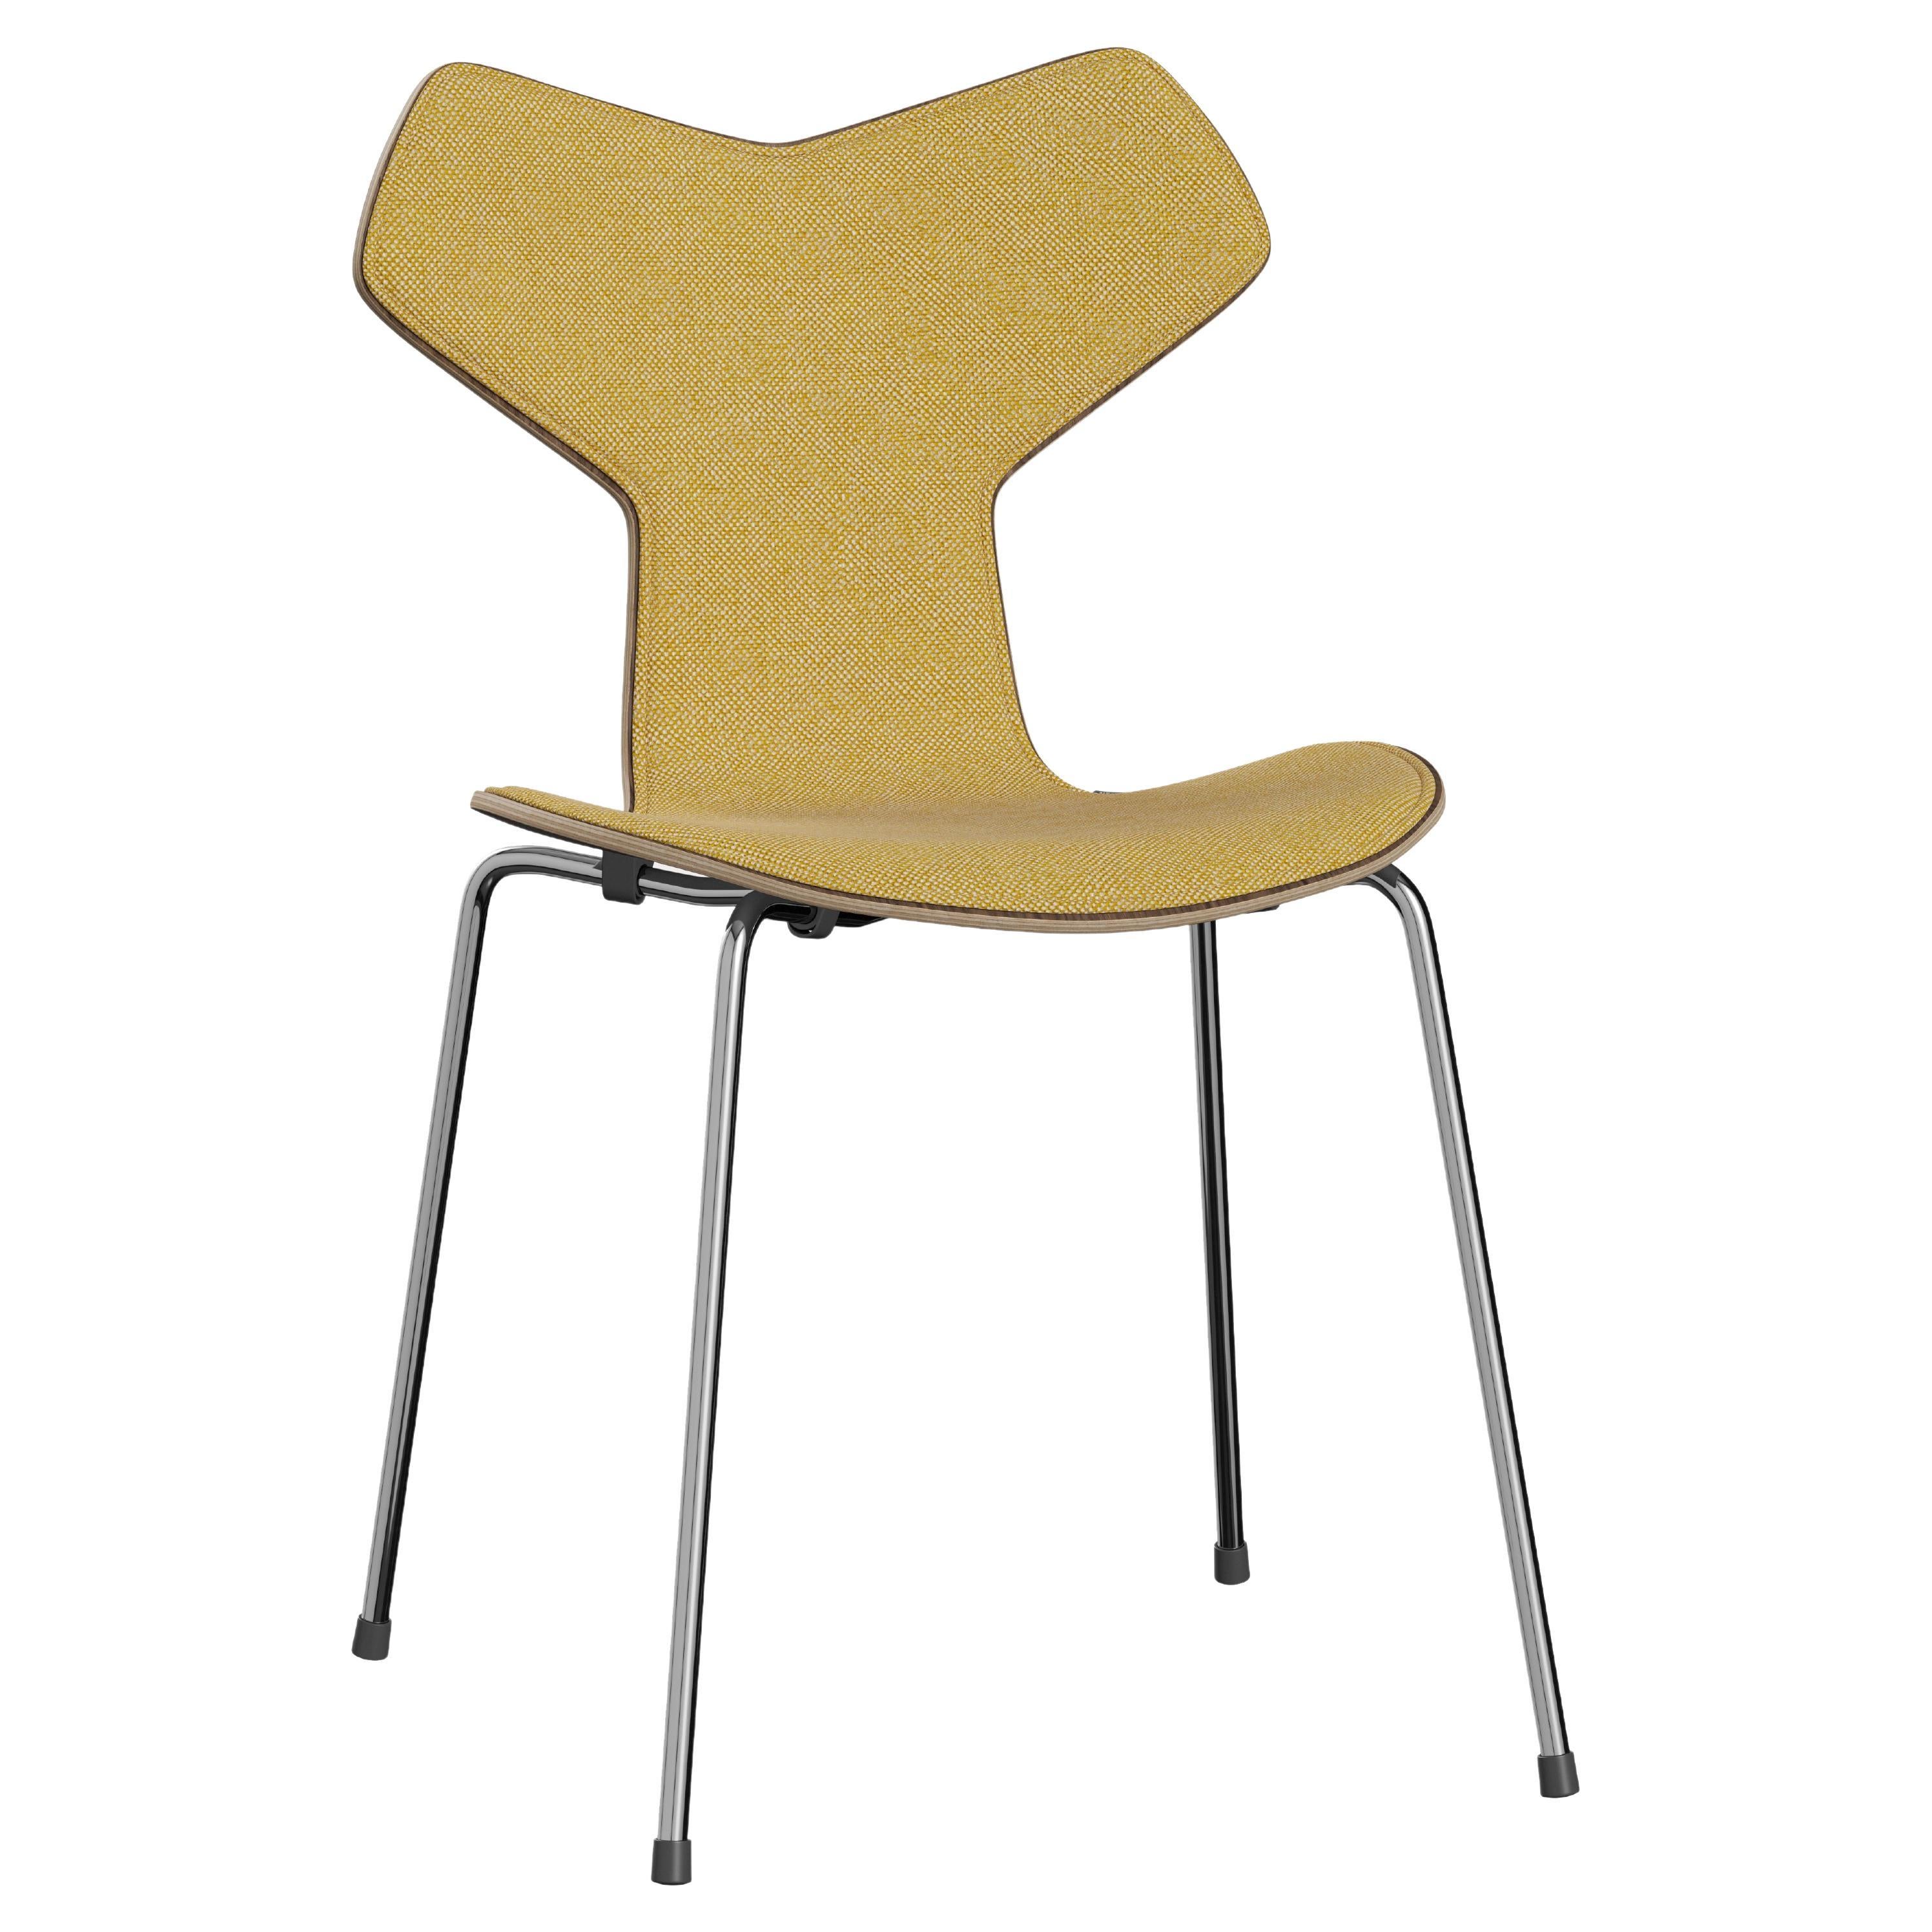 Arne Jacobsen 'Grand Prix' Chair for Fritz Hansen in Partial Fabric Upholstery For Sale